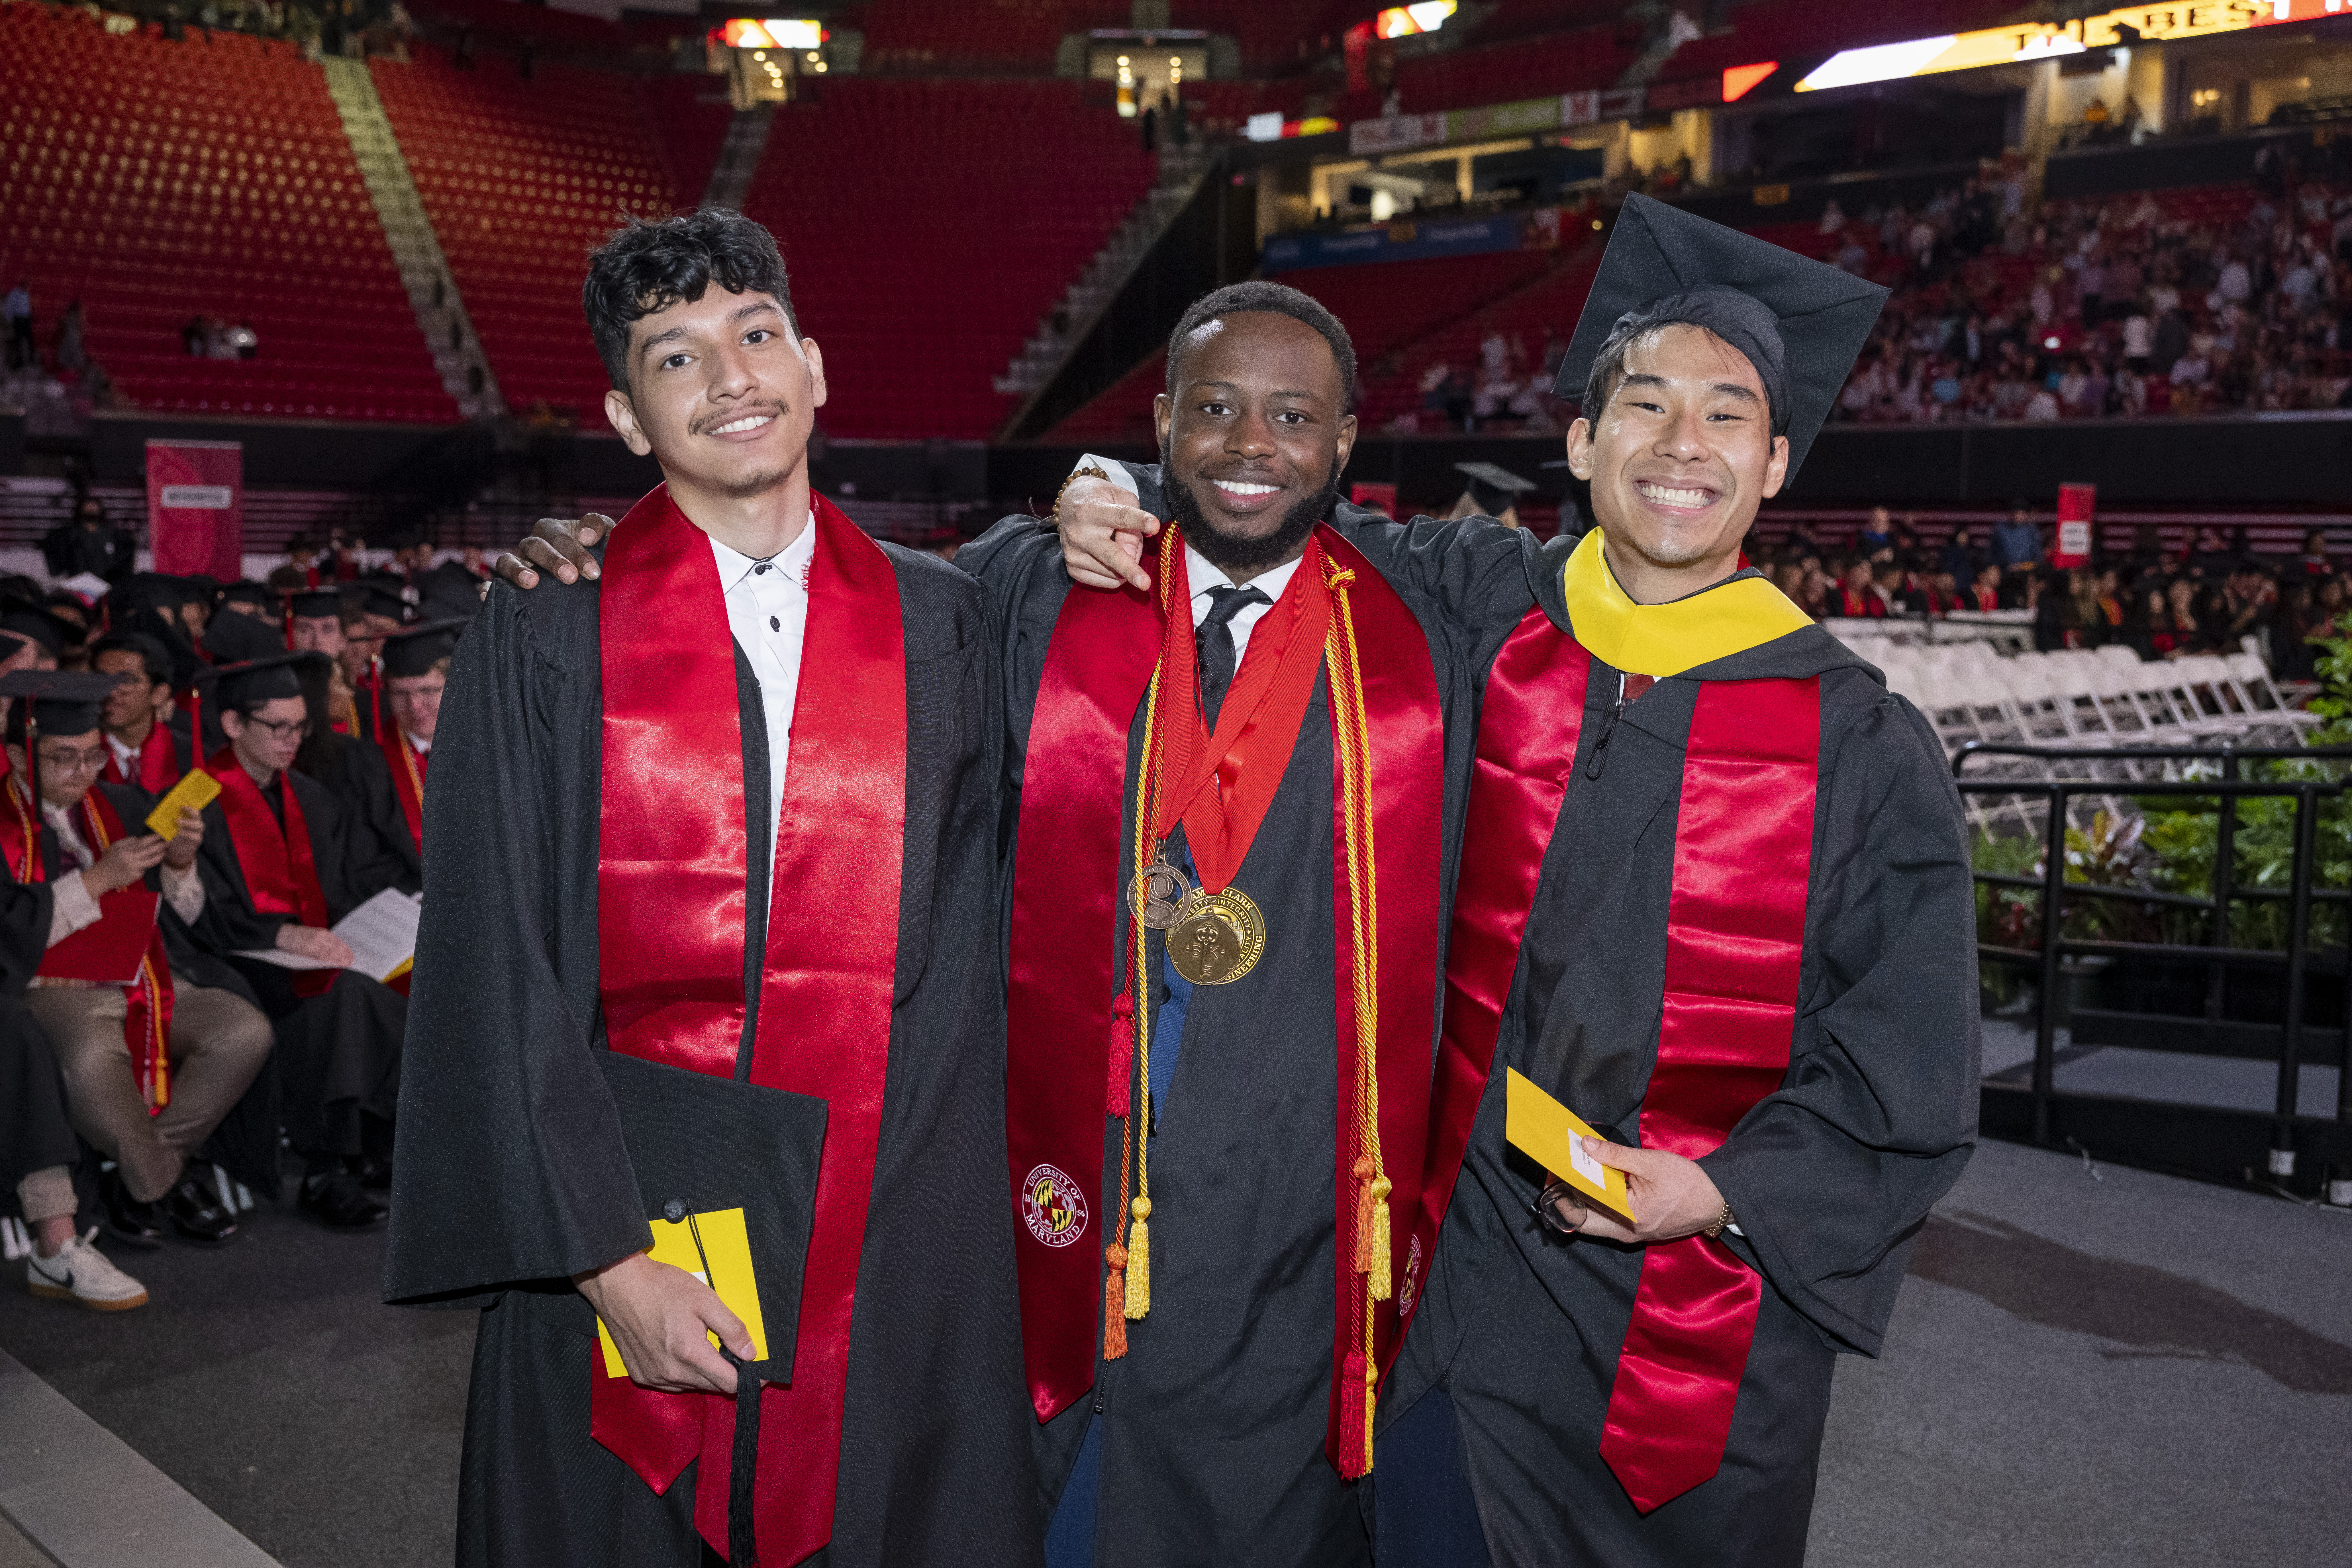 Three students smiling in full regalia before commencement in the Xfinity Center